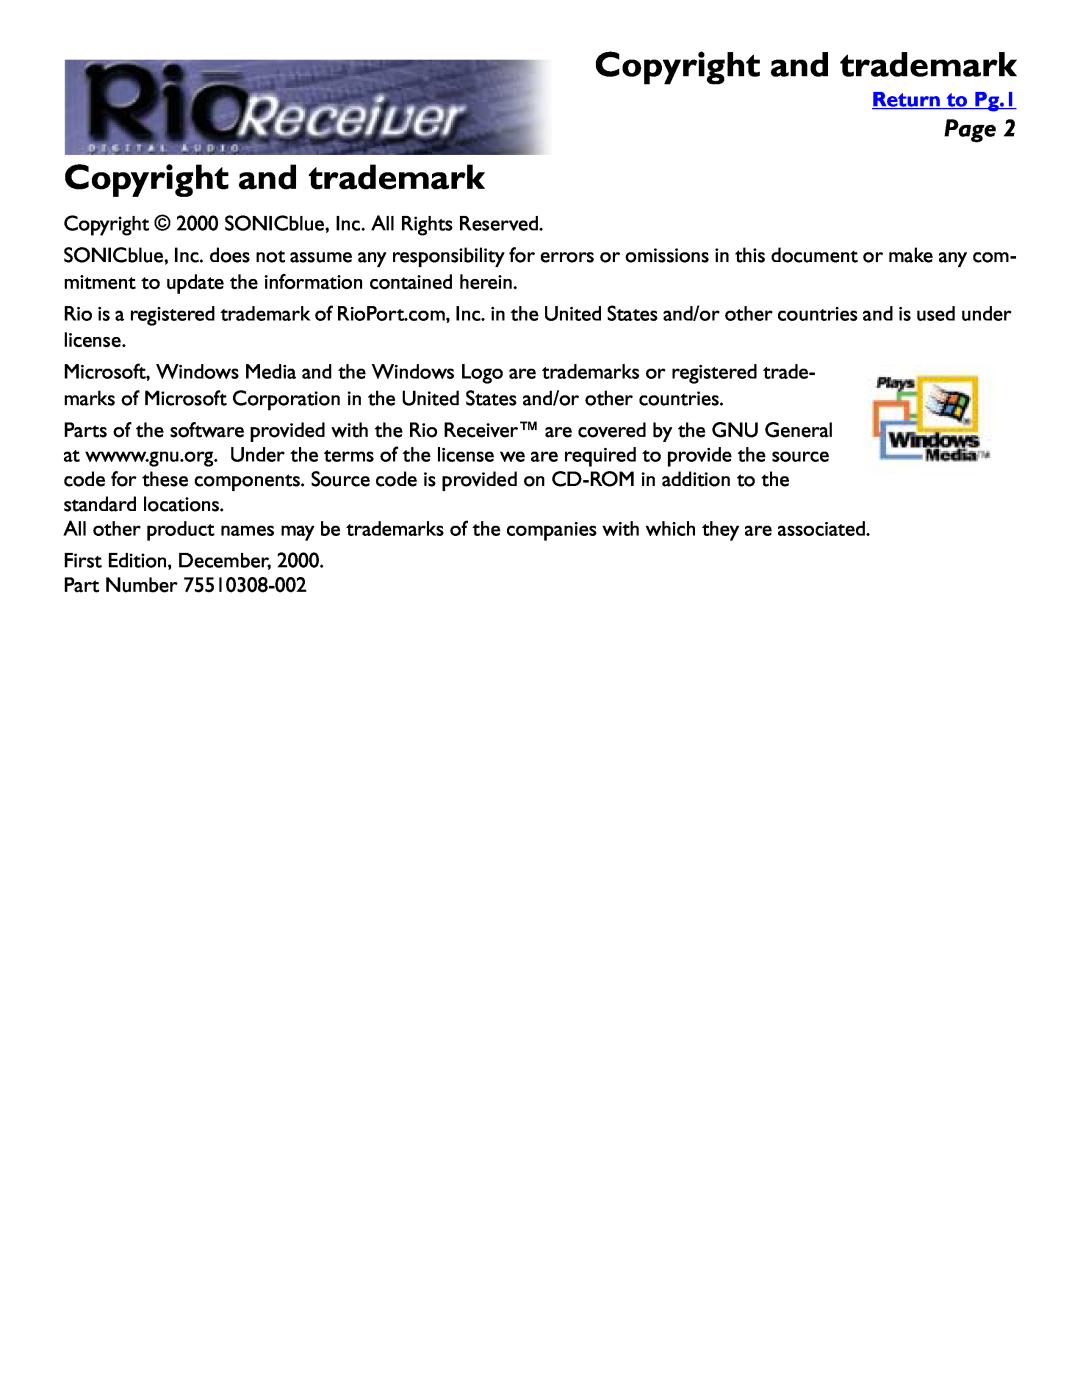 Rio Audio Digital Audio Receiver manual Copyright and trademark, Page, Return to Pg.1 